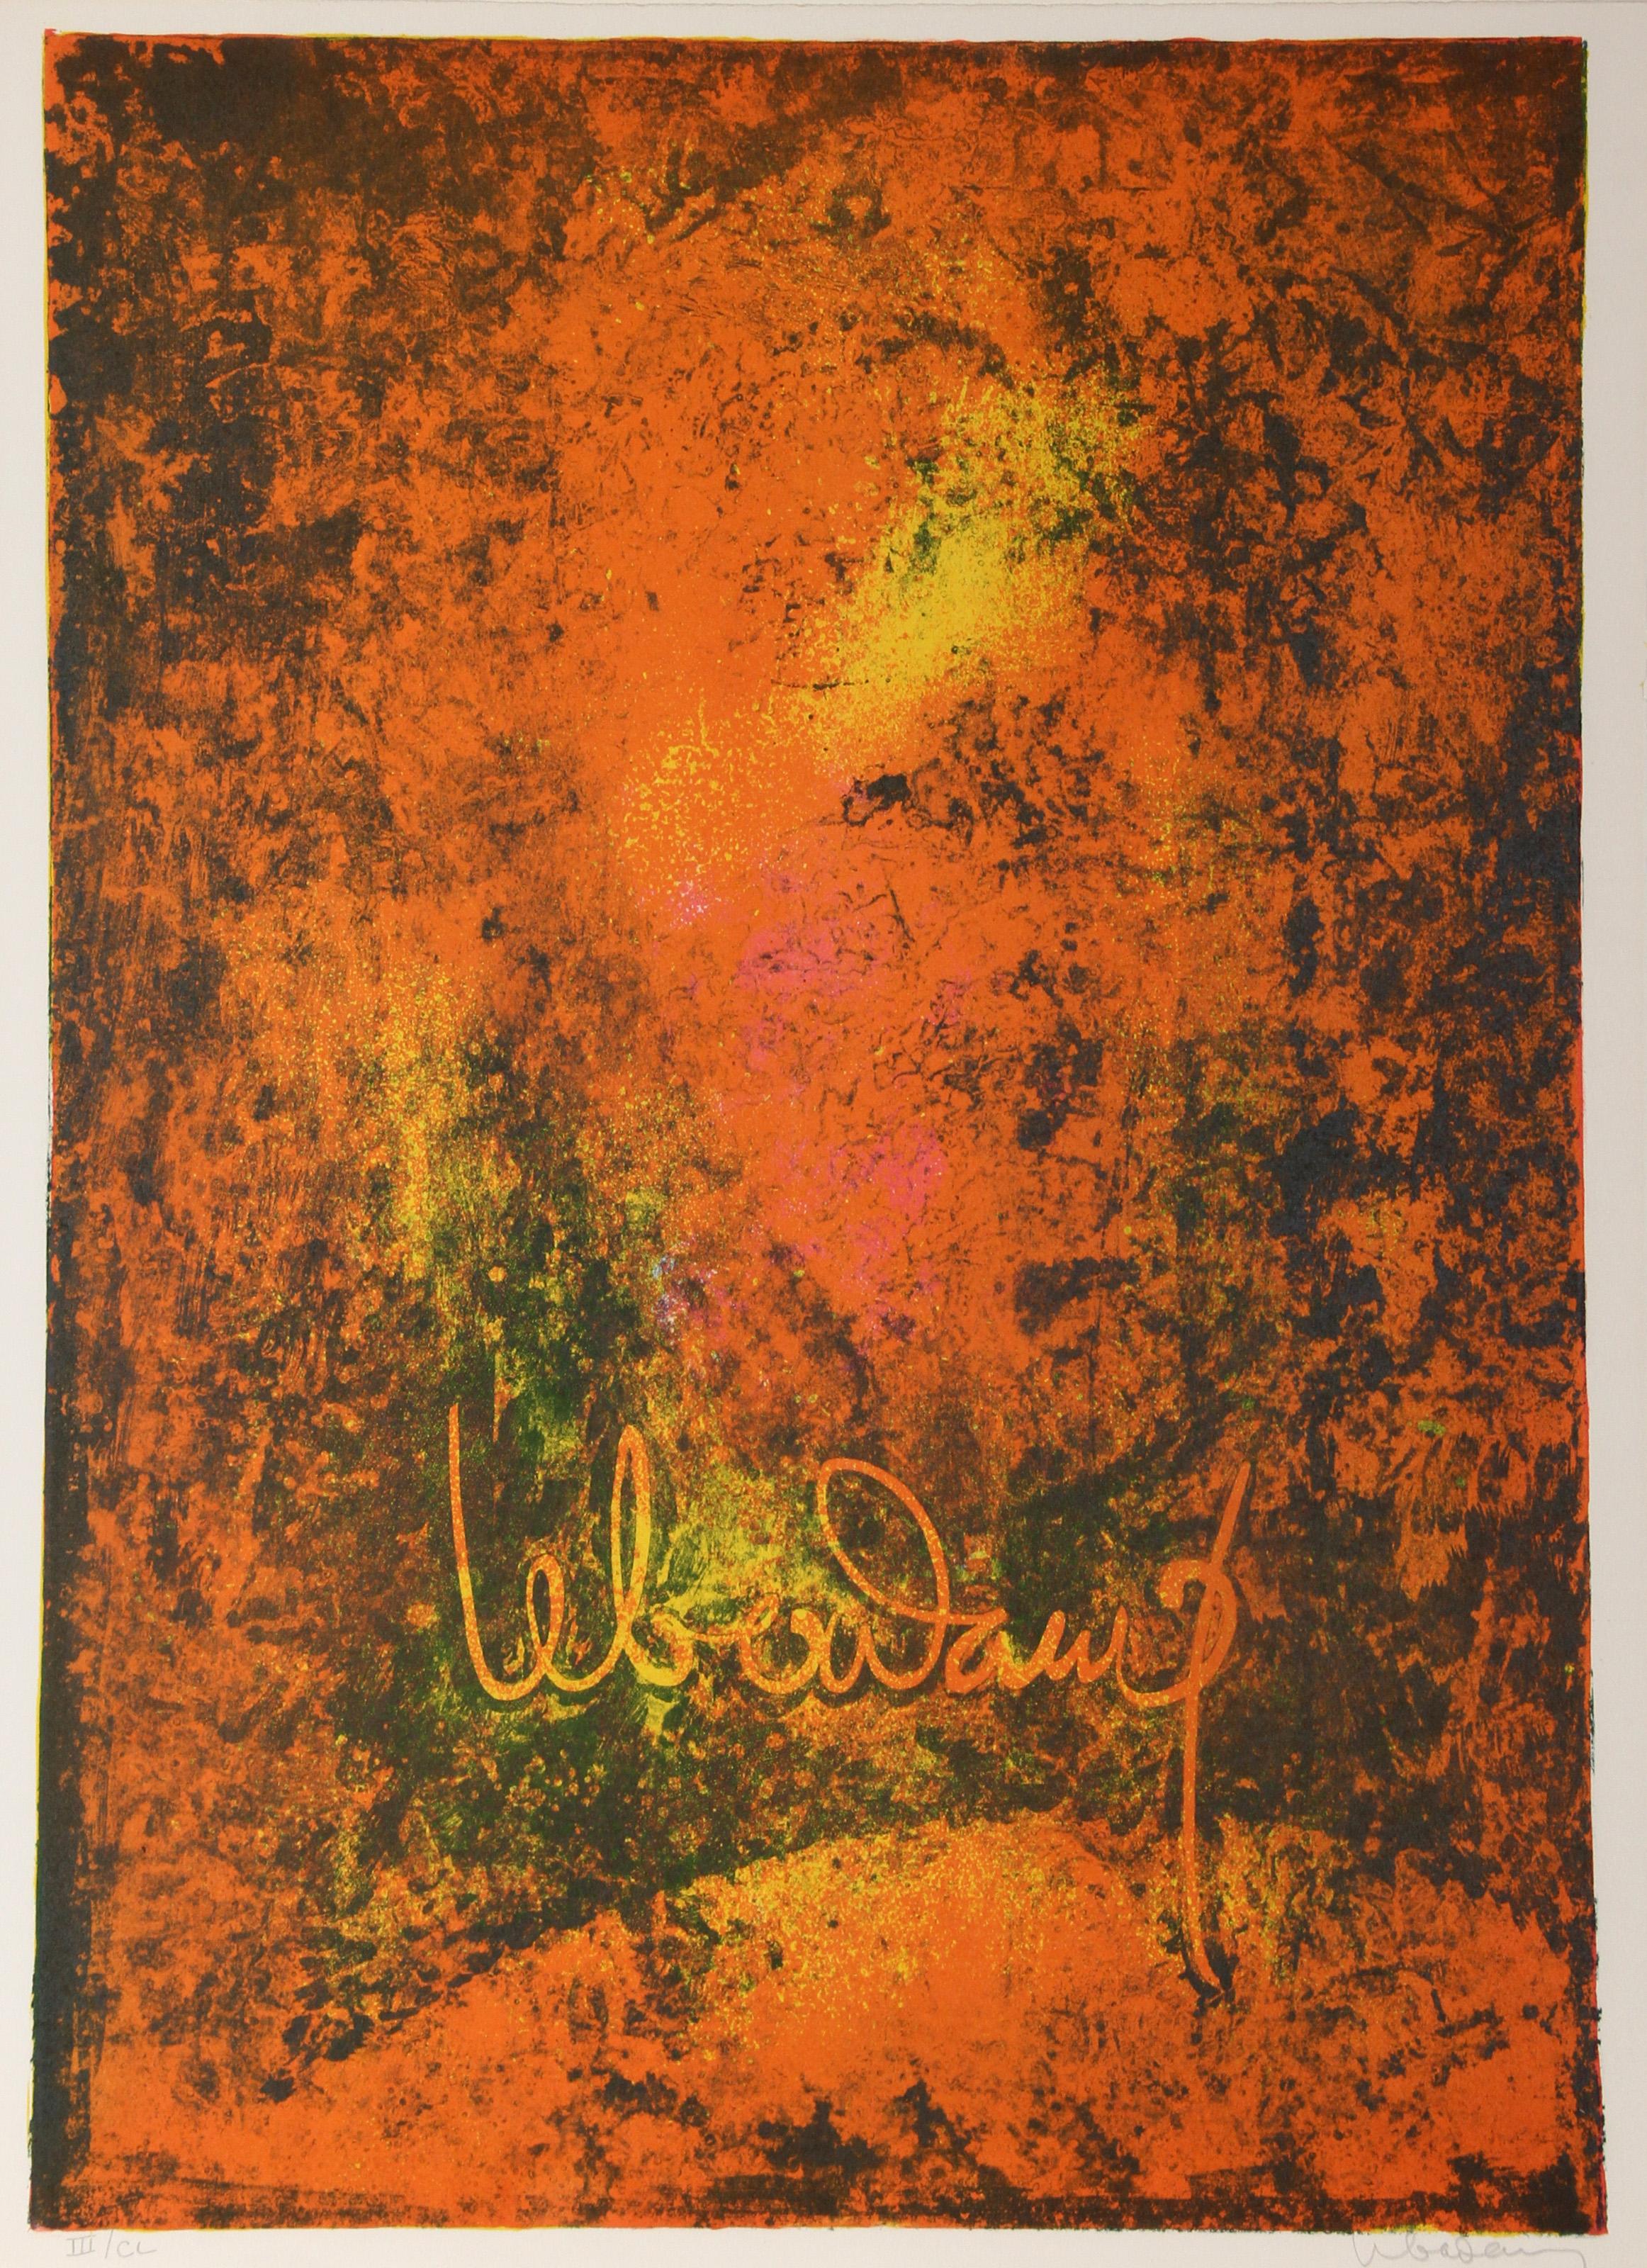 Lebadang (aka Hoi), Vietnamese (1922 - 2015) -  Nature Prays Without Words 5. Year: 1967, Medium: Lithograph on Arches, signed and numbered in pencil, Edition: III/CL, Size: 30  x 22 in. (76.2  x 55.88 cm) 